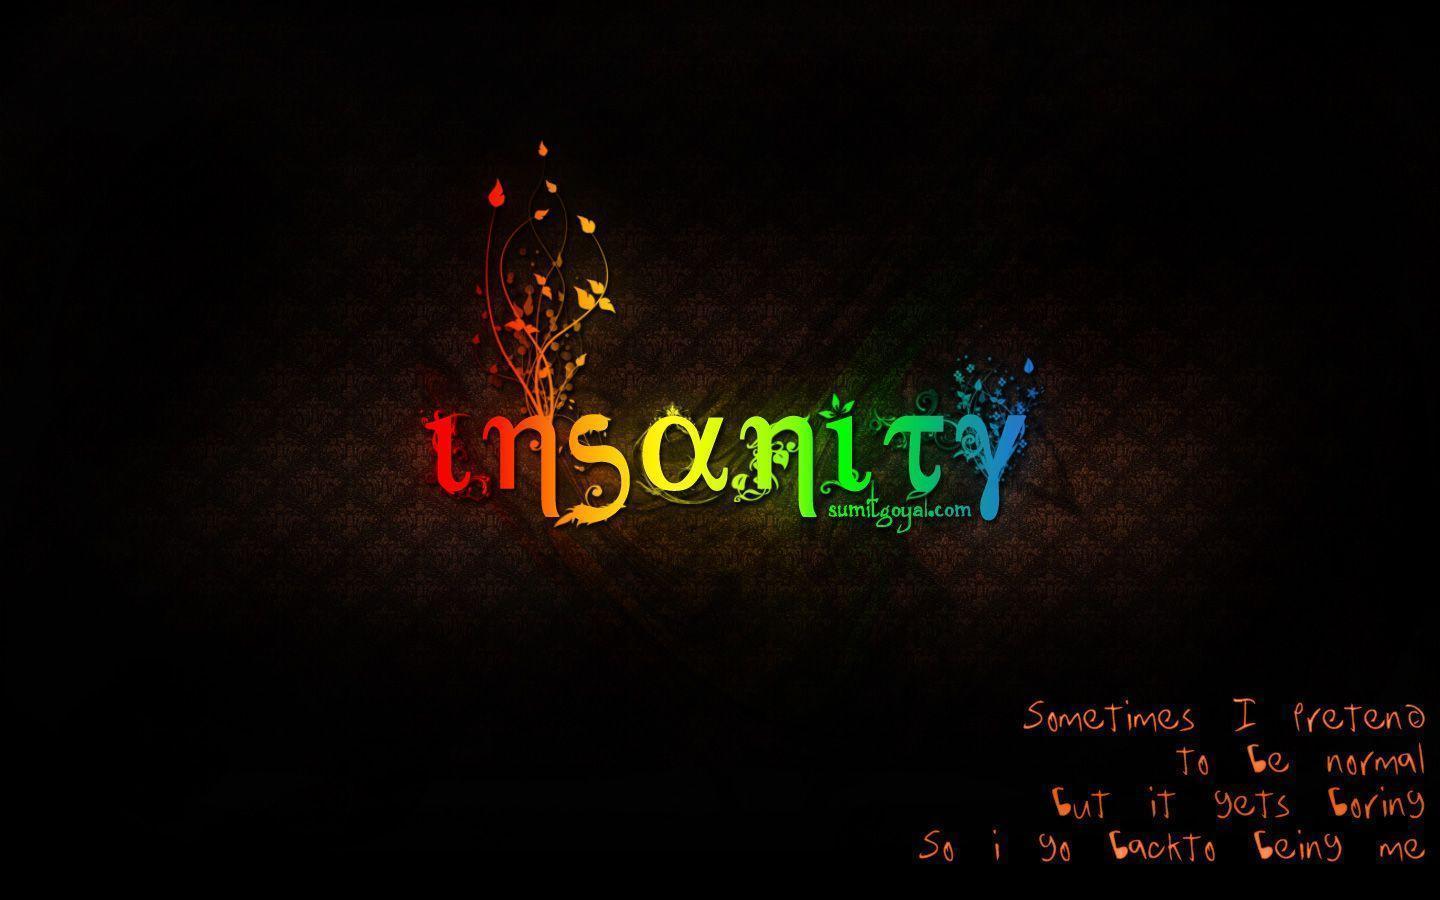 Insanity Wallpaper, High Quality Pics of Insanity in Fantastic